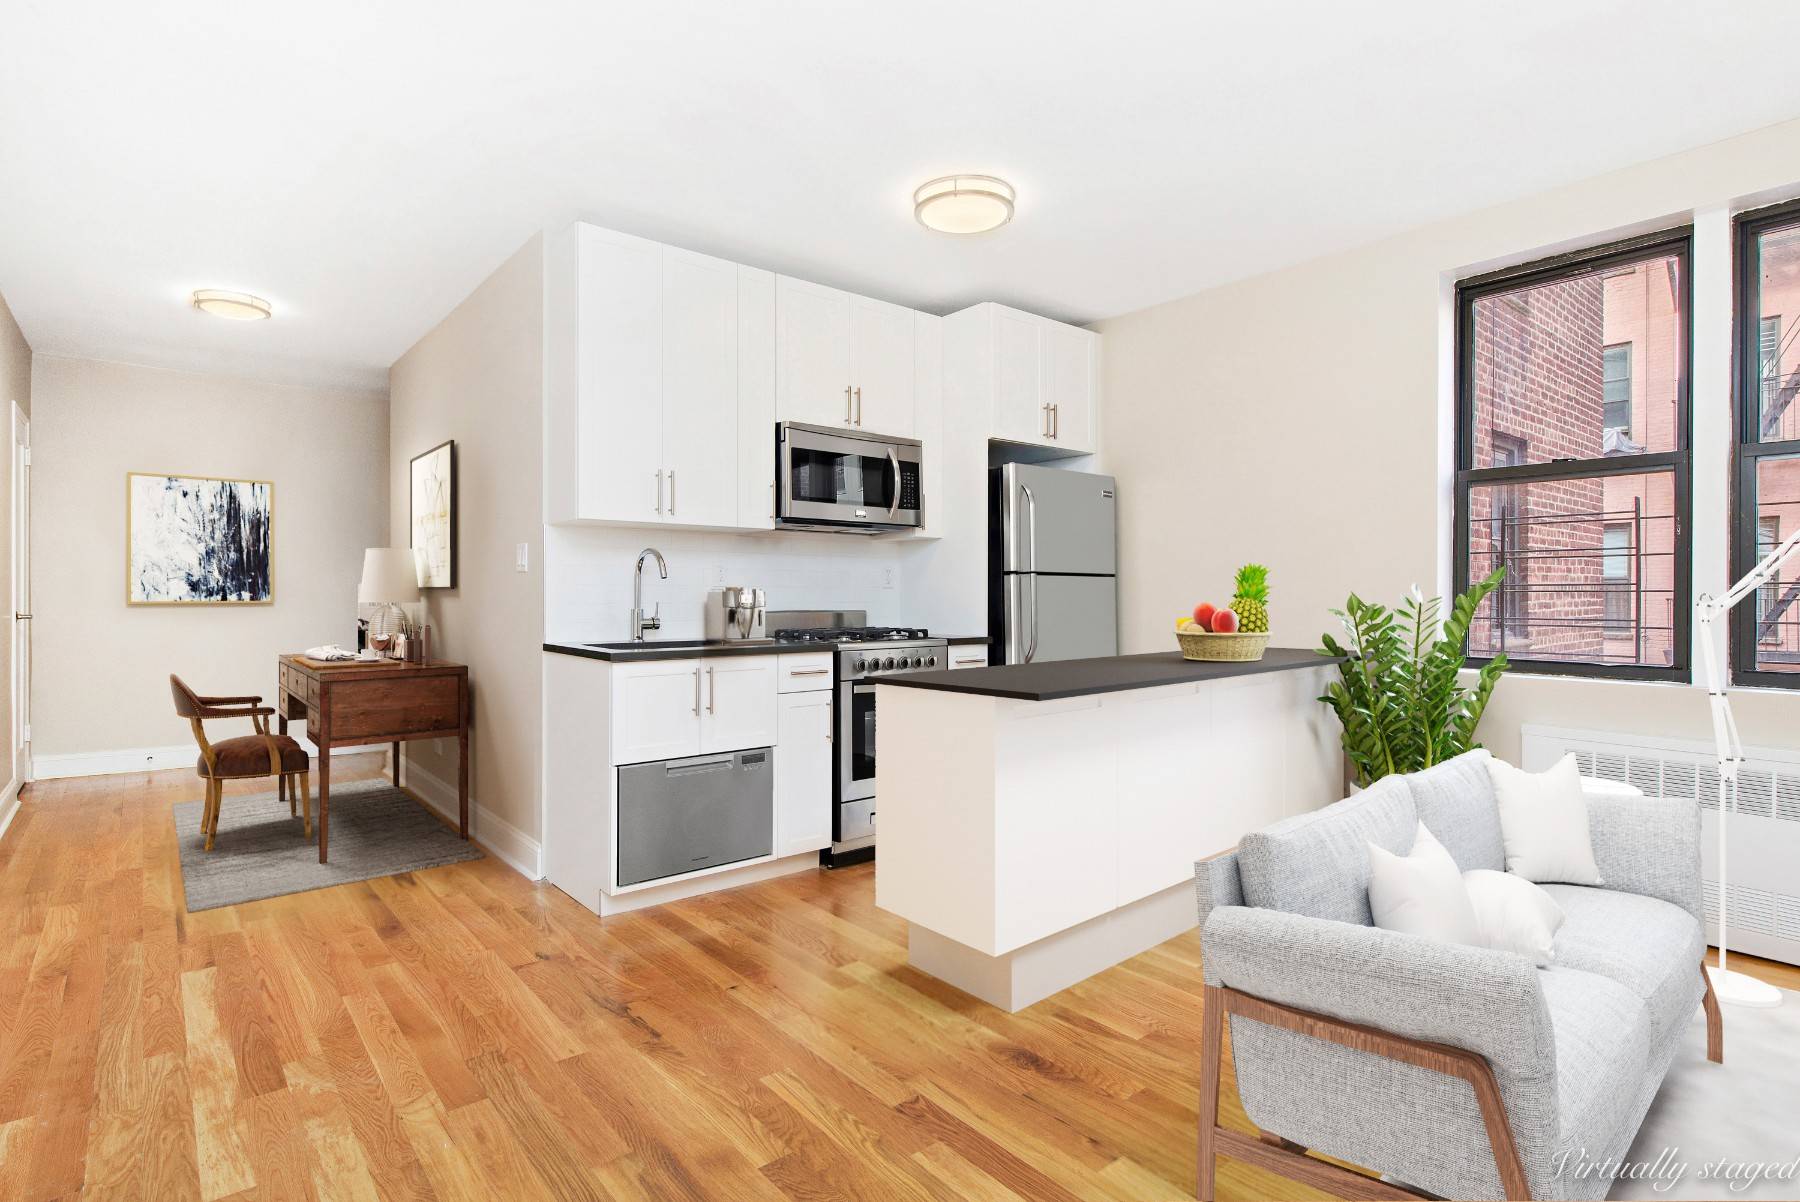 Nestled at the edge of the Hamilton Heights Sugar Hill Historic District, the new Convent Gardens Condominiums blends the best of the neighborhood's charm with newly renovated residences for the ...